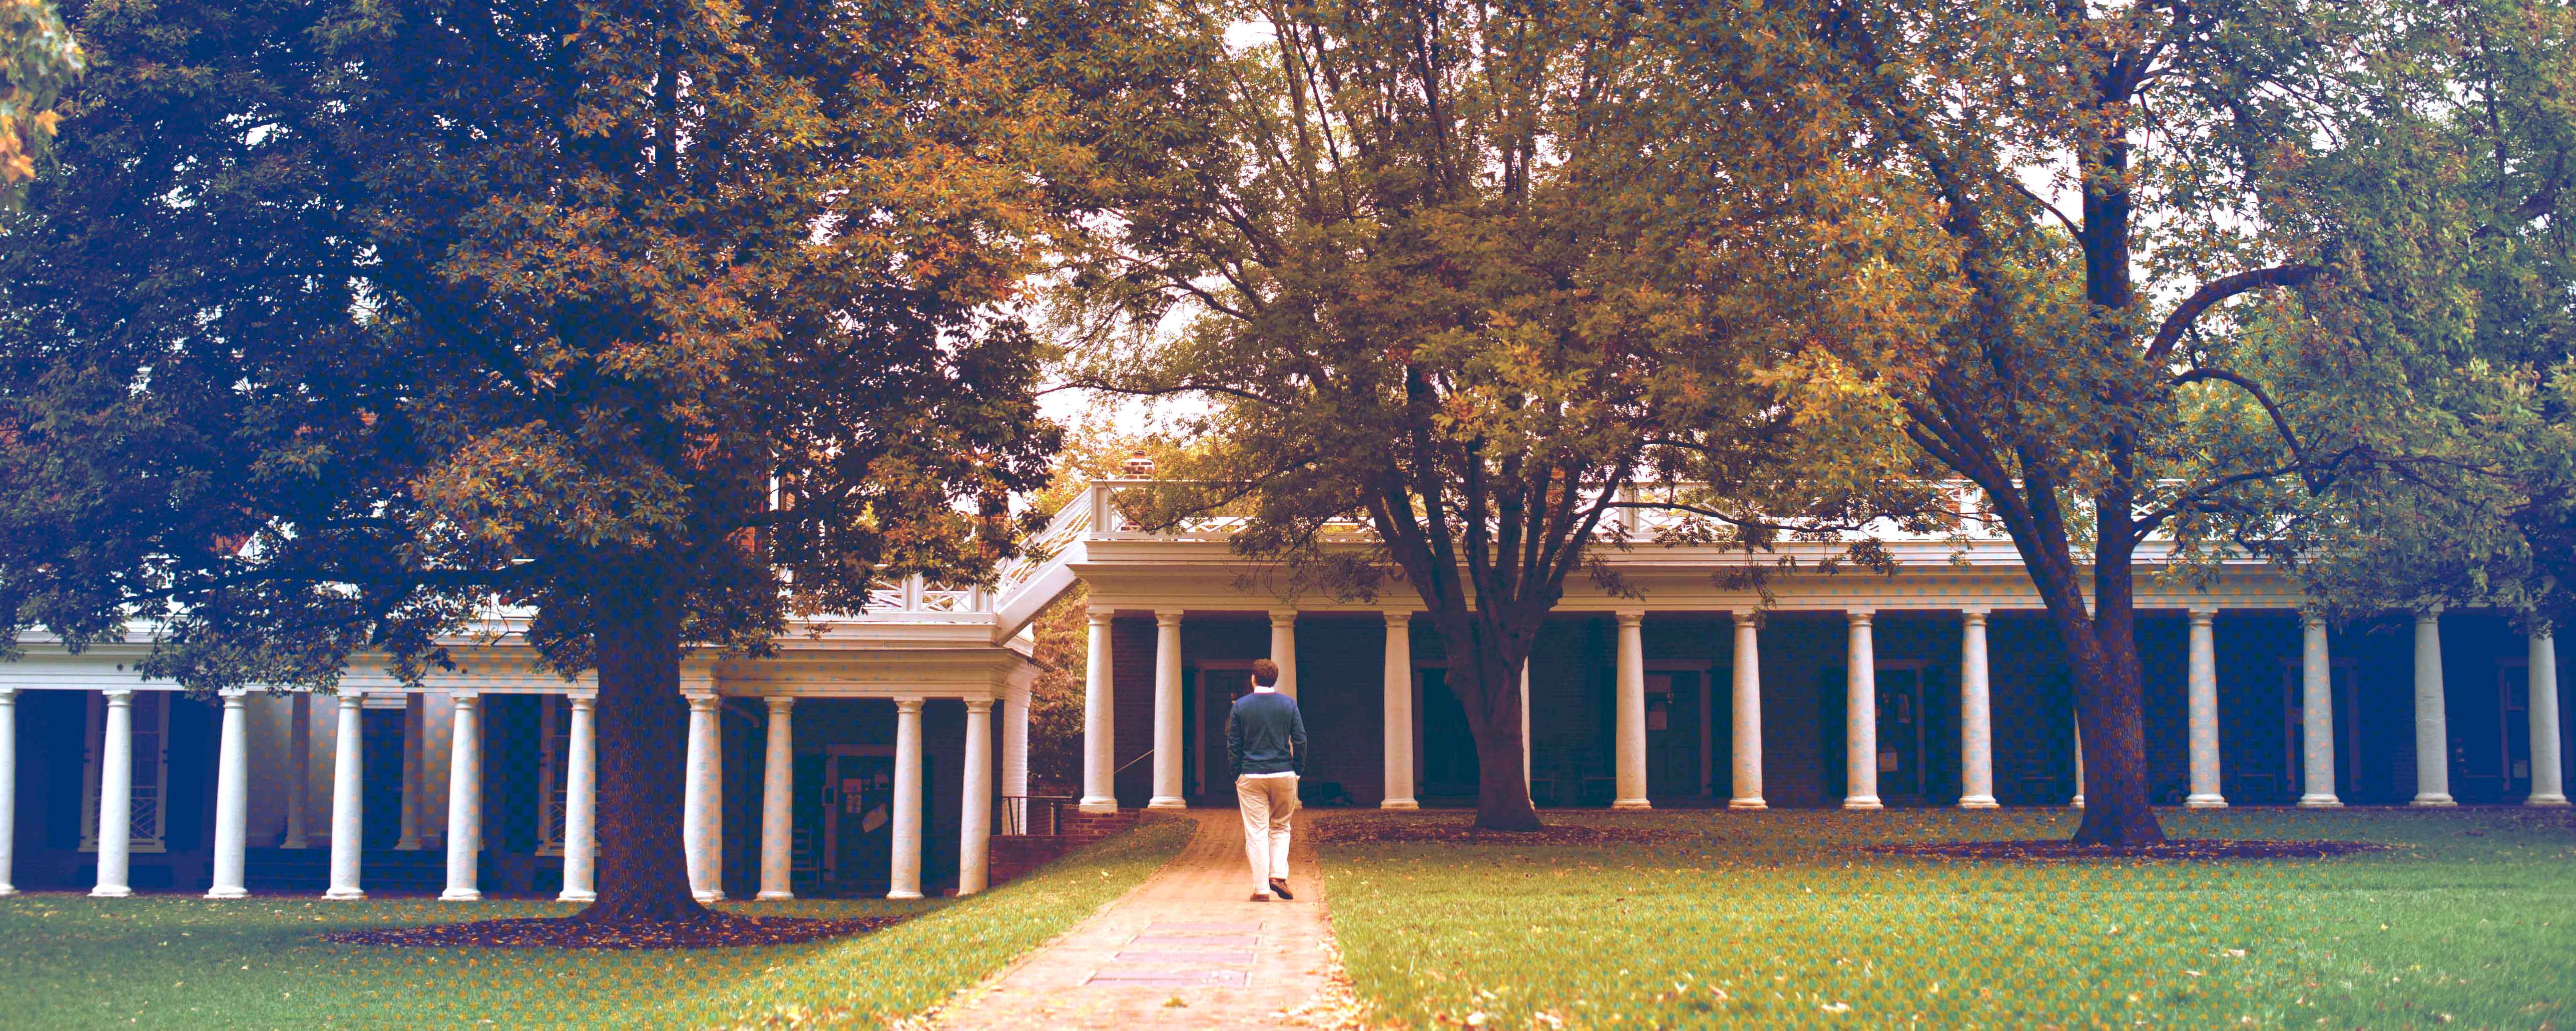 Man walking on a sidewalk to a pavilion building on the lawn